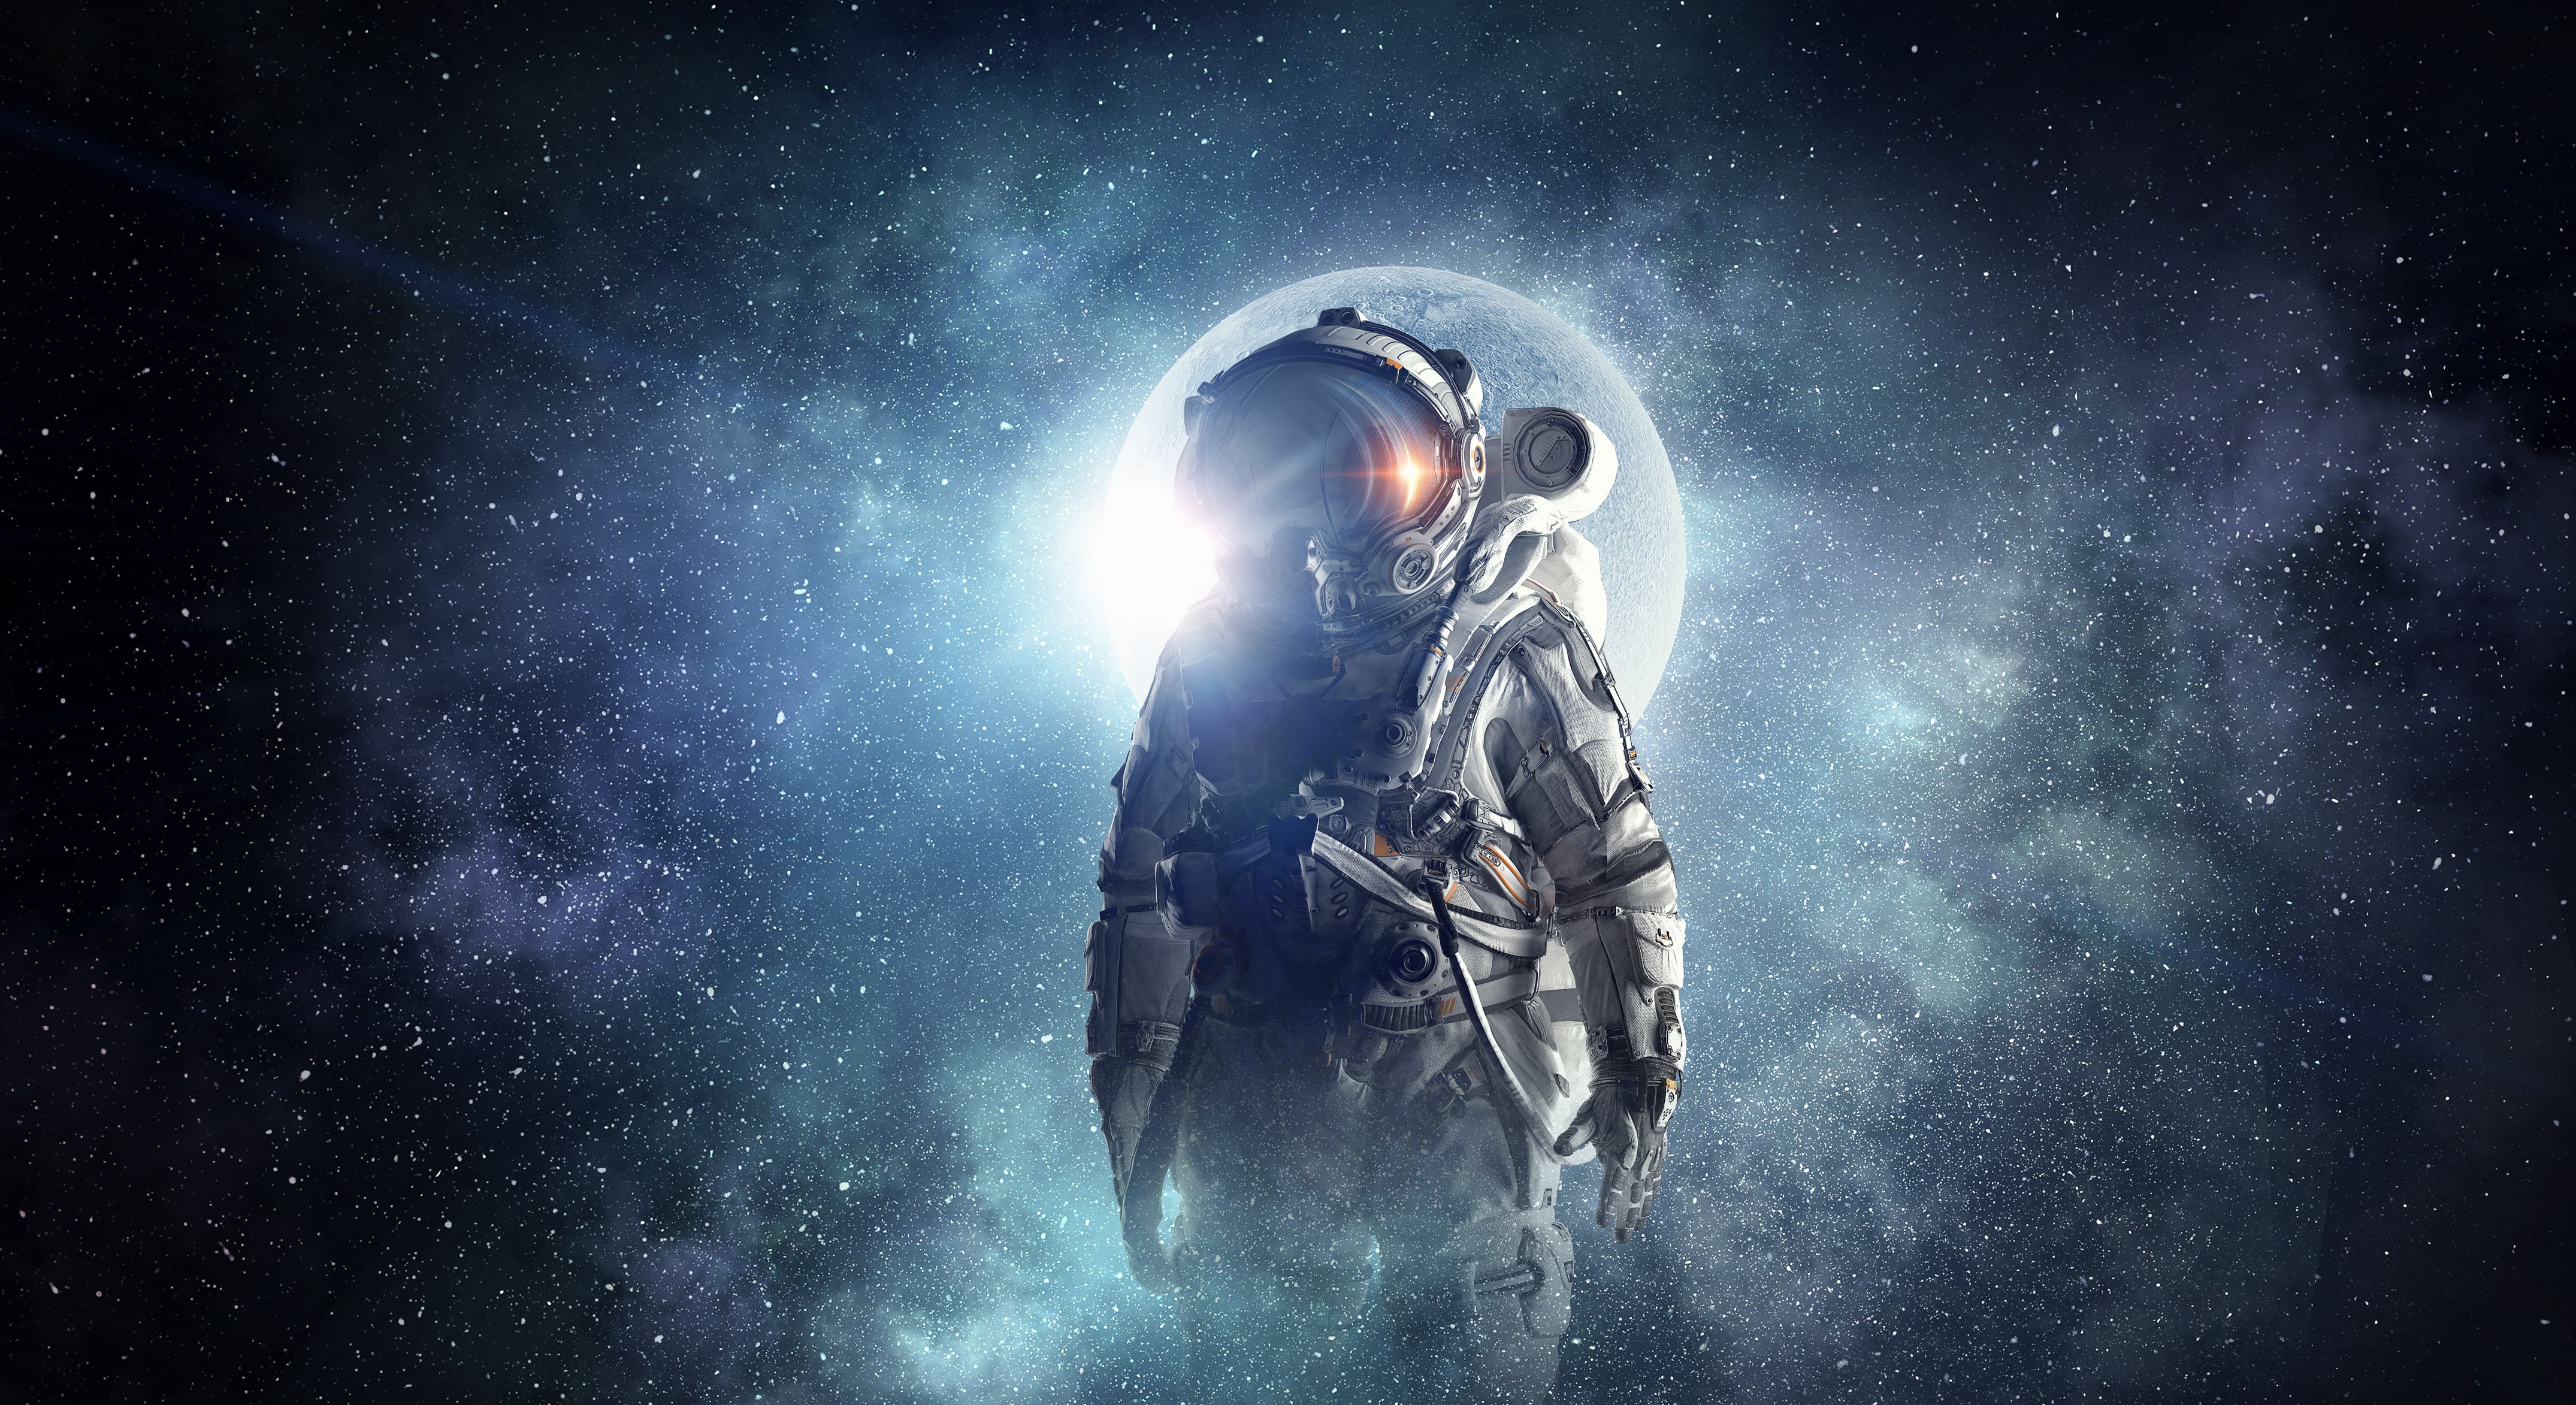 627 Astronaut Wallpaper Stock Video Footage  4K and HD Video Clips   Shutterstock